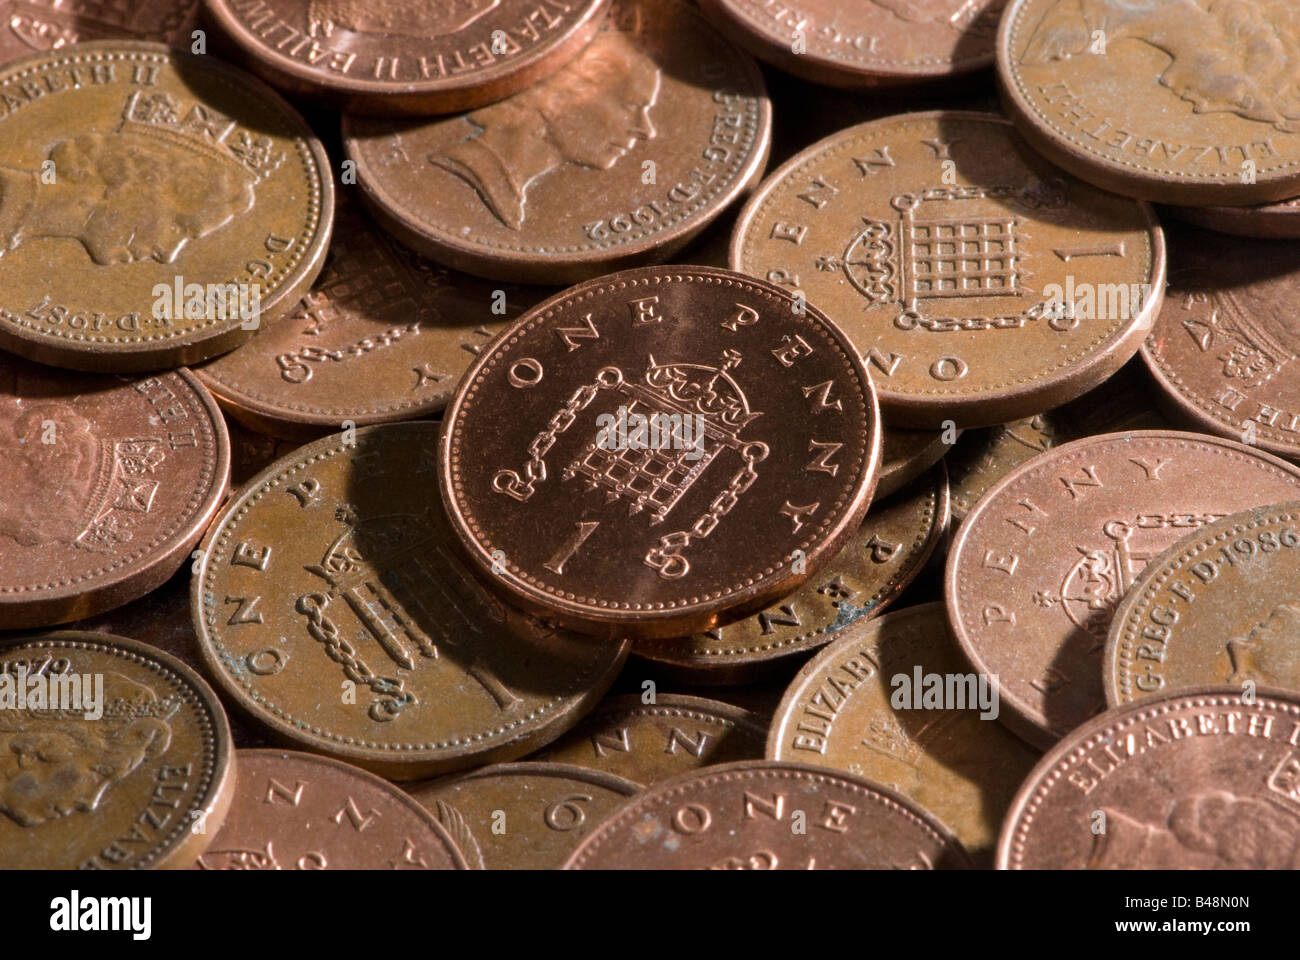 Stirling one penny coins. Stock Photo